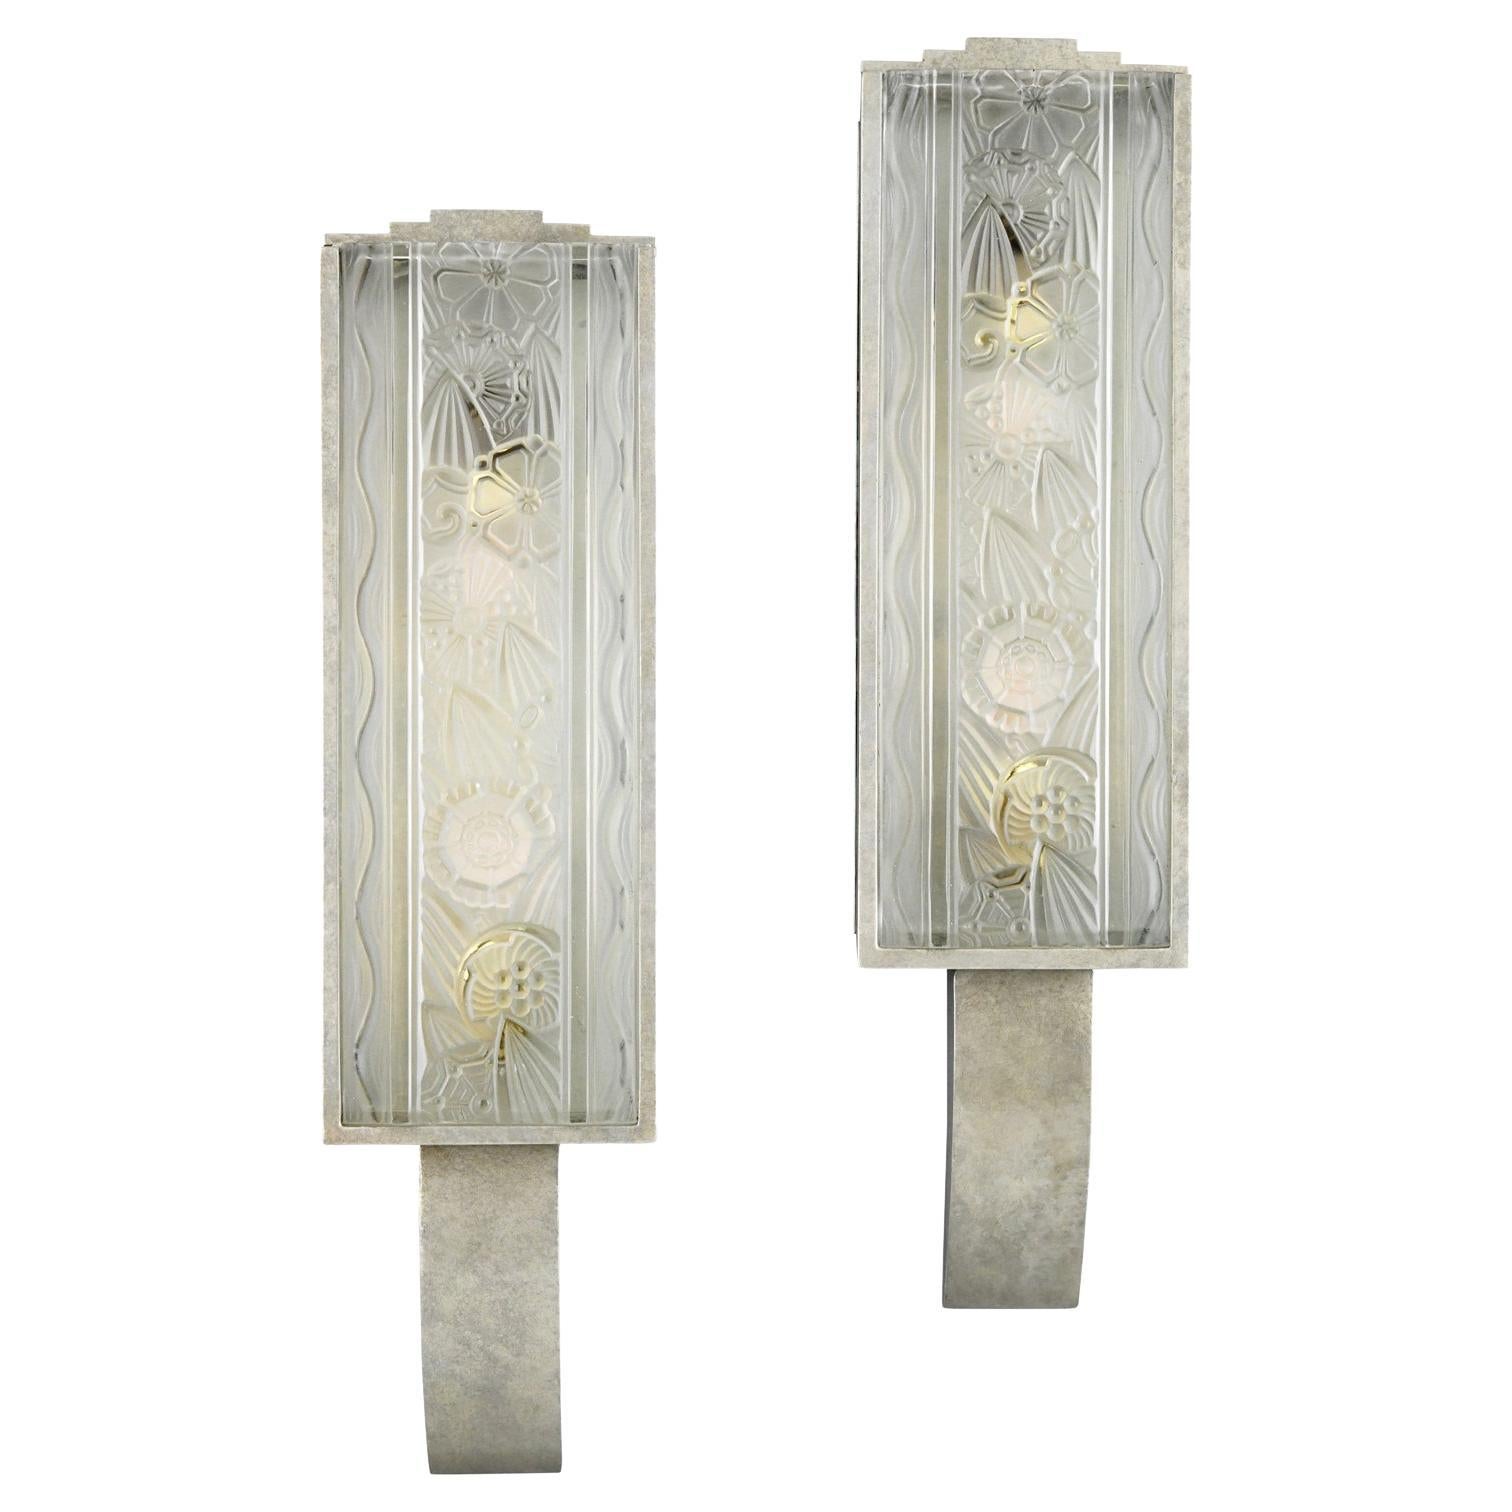 Pair of Art Deco wall lights or sconces signed by Hettier & Vincent 1925